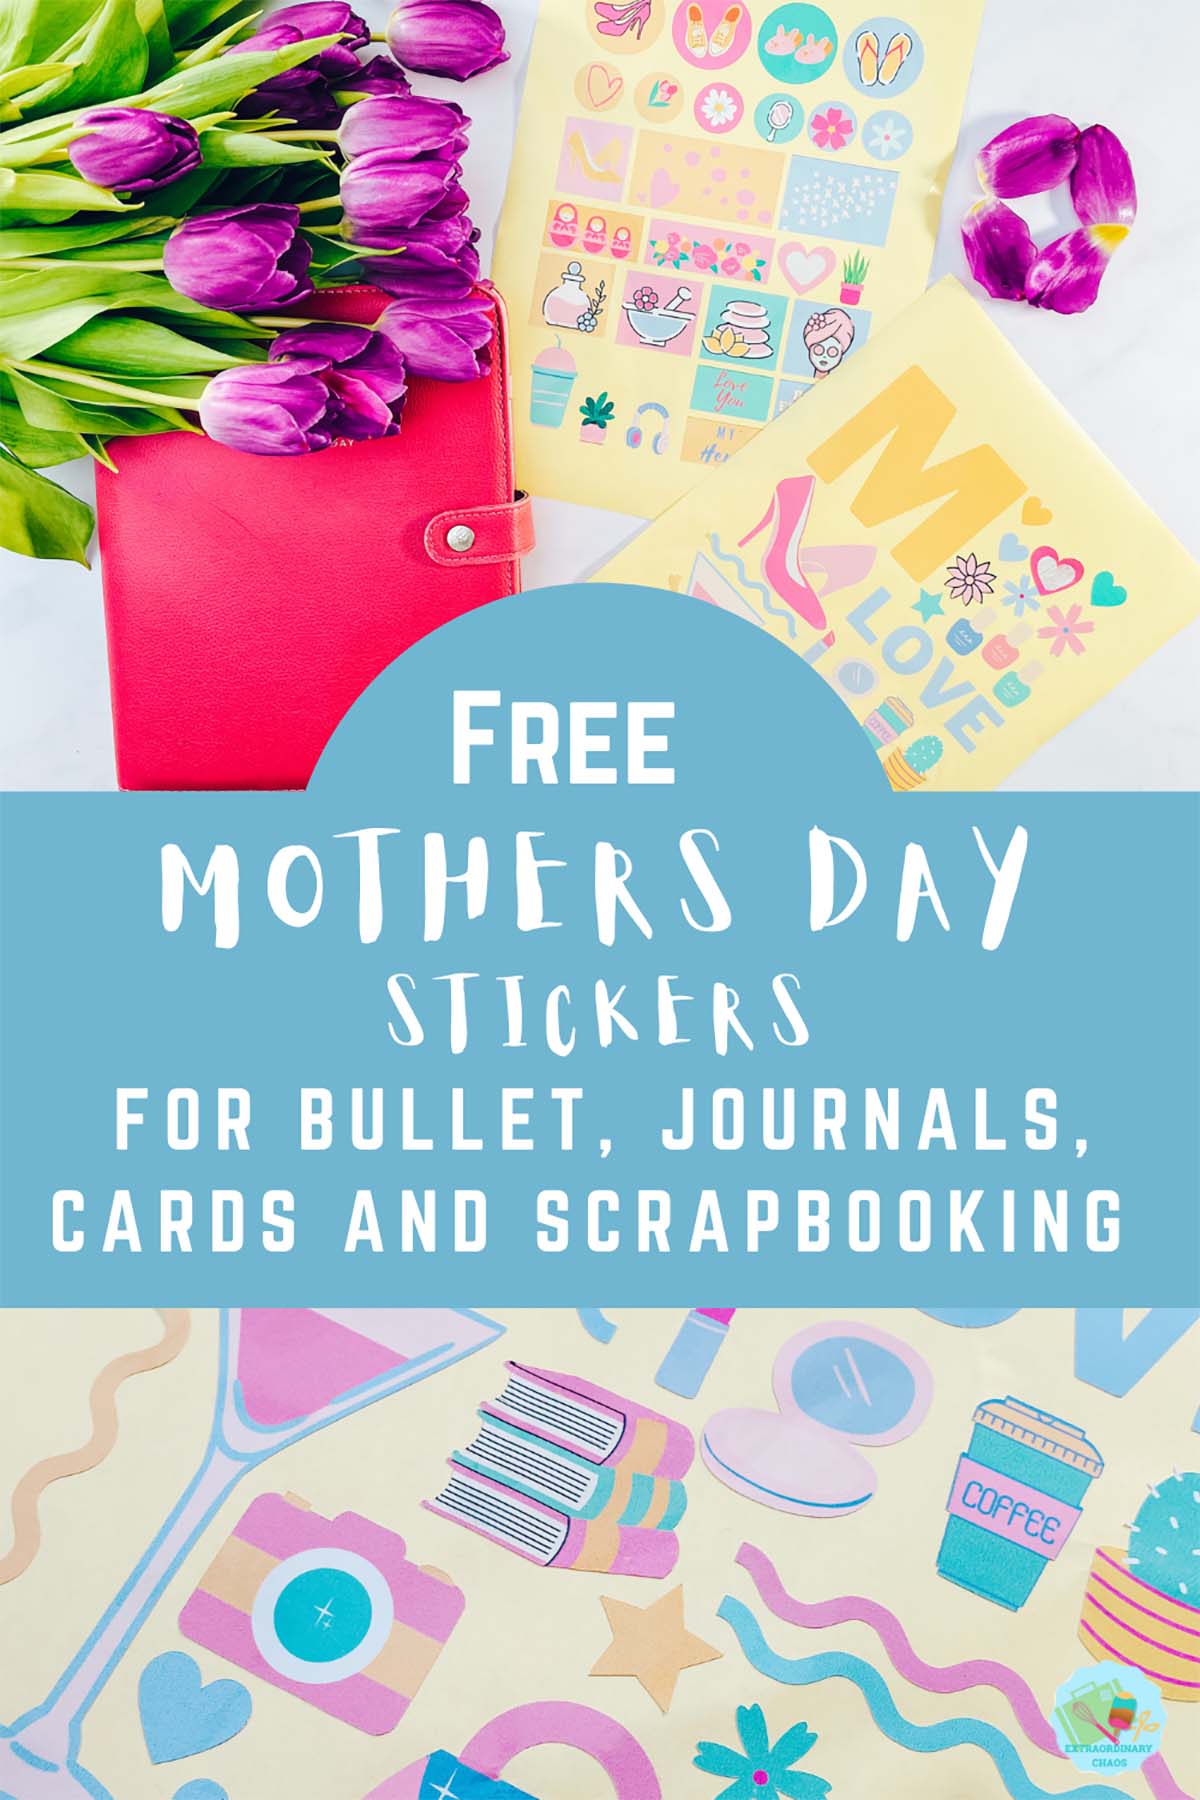 Free Mothers Day printable stickers for Cricut Print and cut or to cut out by hand fro cards, planners scrapbooking and bullet journals